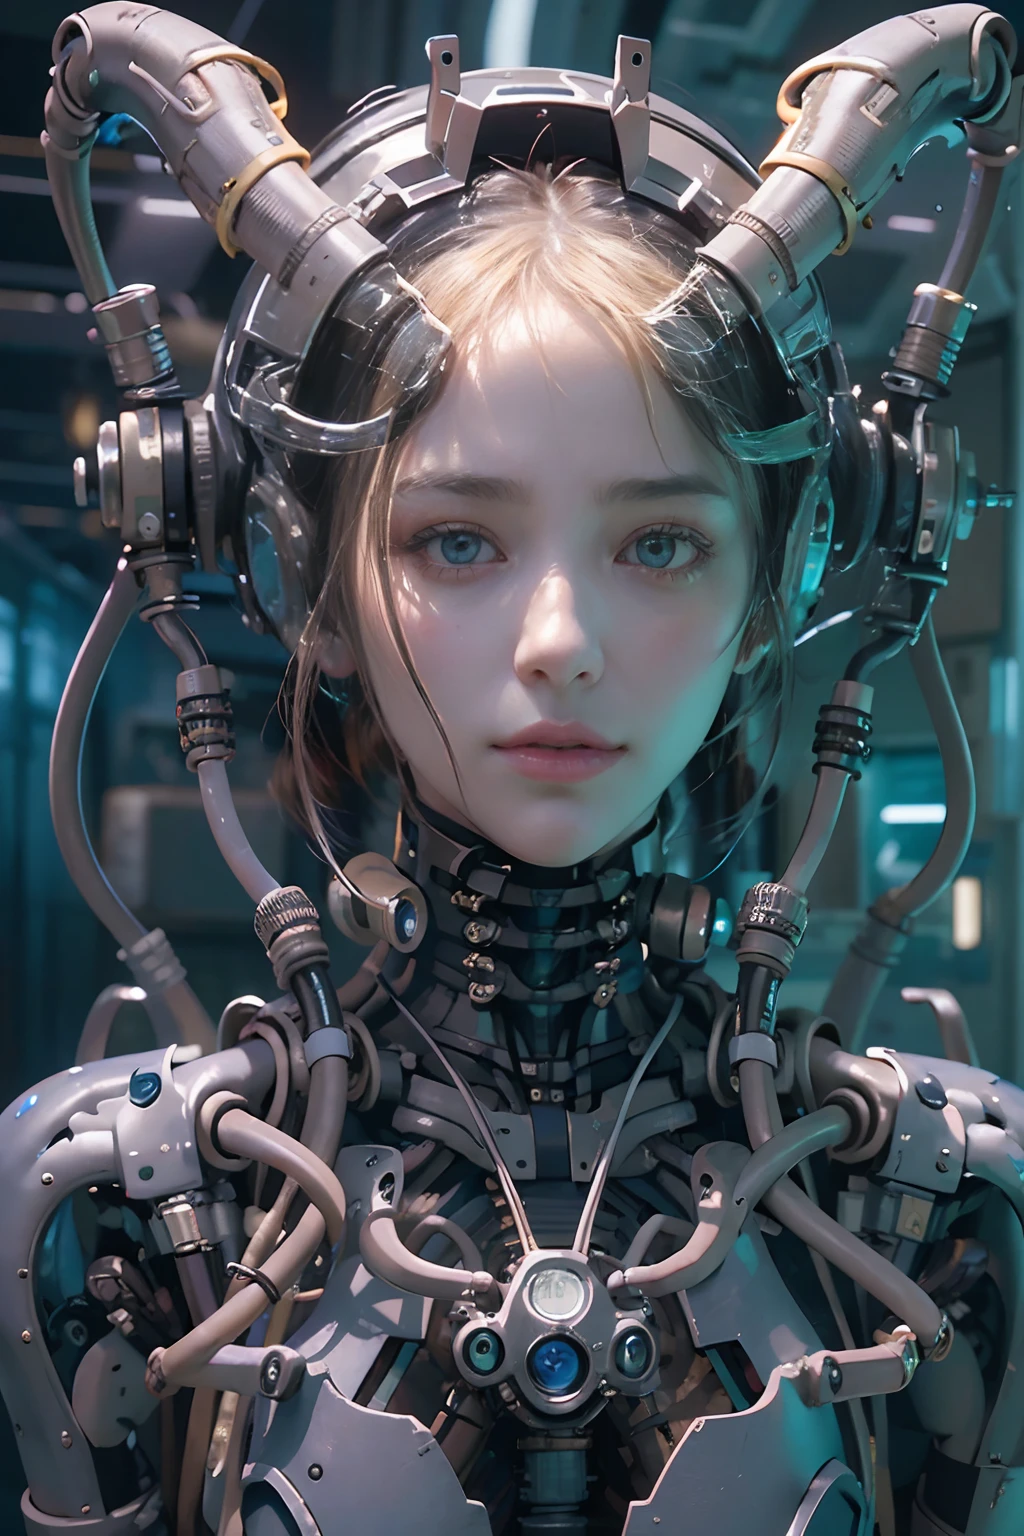 top-quality, masterpiece, ultra-high resolution, ((photorealistic portrait: 1.4), Image of AW, 1 Cyberpunk Robot Girl, Glossy skin, (Ultra Realistic Details)), mechanical limbs, Pipes connected to mechanical parts, A mechanical spine attached to the spine., mechanical cervical attachment to the neck, wires and cables connecting to head, evangelion, ((Ghost in the shell)), Small fluorescent LED bulbs, Global Lighting, Deep Shadows, Octane Rendering, 10, Ultra Sharp, Metal, glass, clear 
plastic, Complex Ornaments Details, Baroque details, Very intricate details, Realistic lighting, CGSoation trend, facing camera, neon details, (Robot machines in the background), Art by H.R. Giger and Alphonse Mucha.